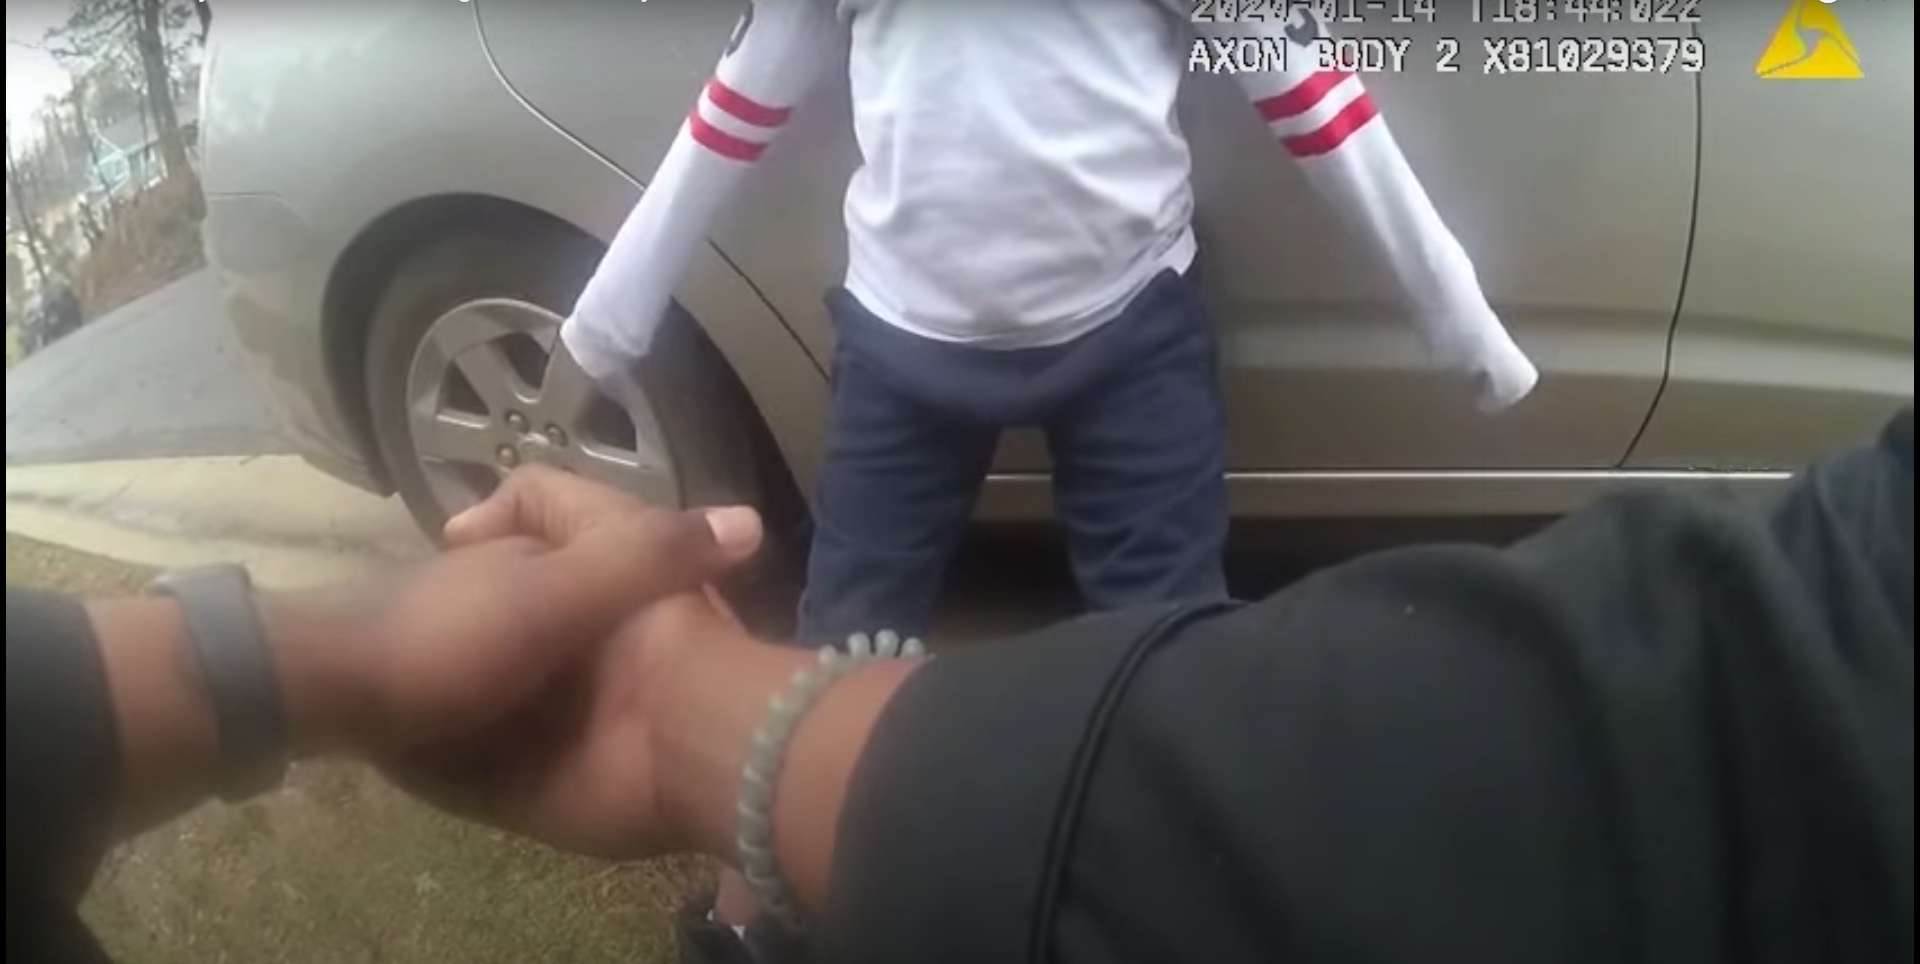 Police release video from Montgomery Co. showing police officer scolding and handcuffing a 5-year-old boy